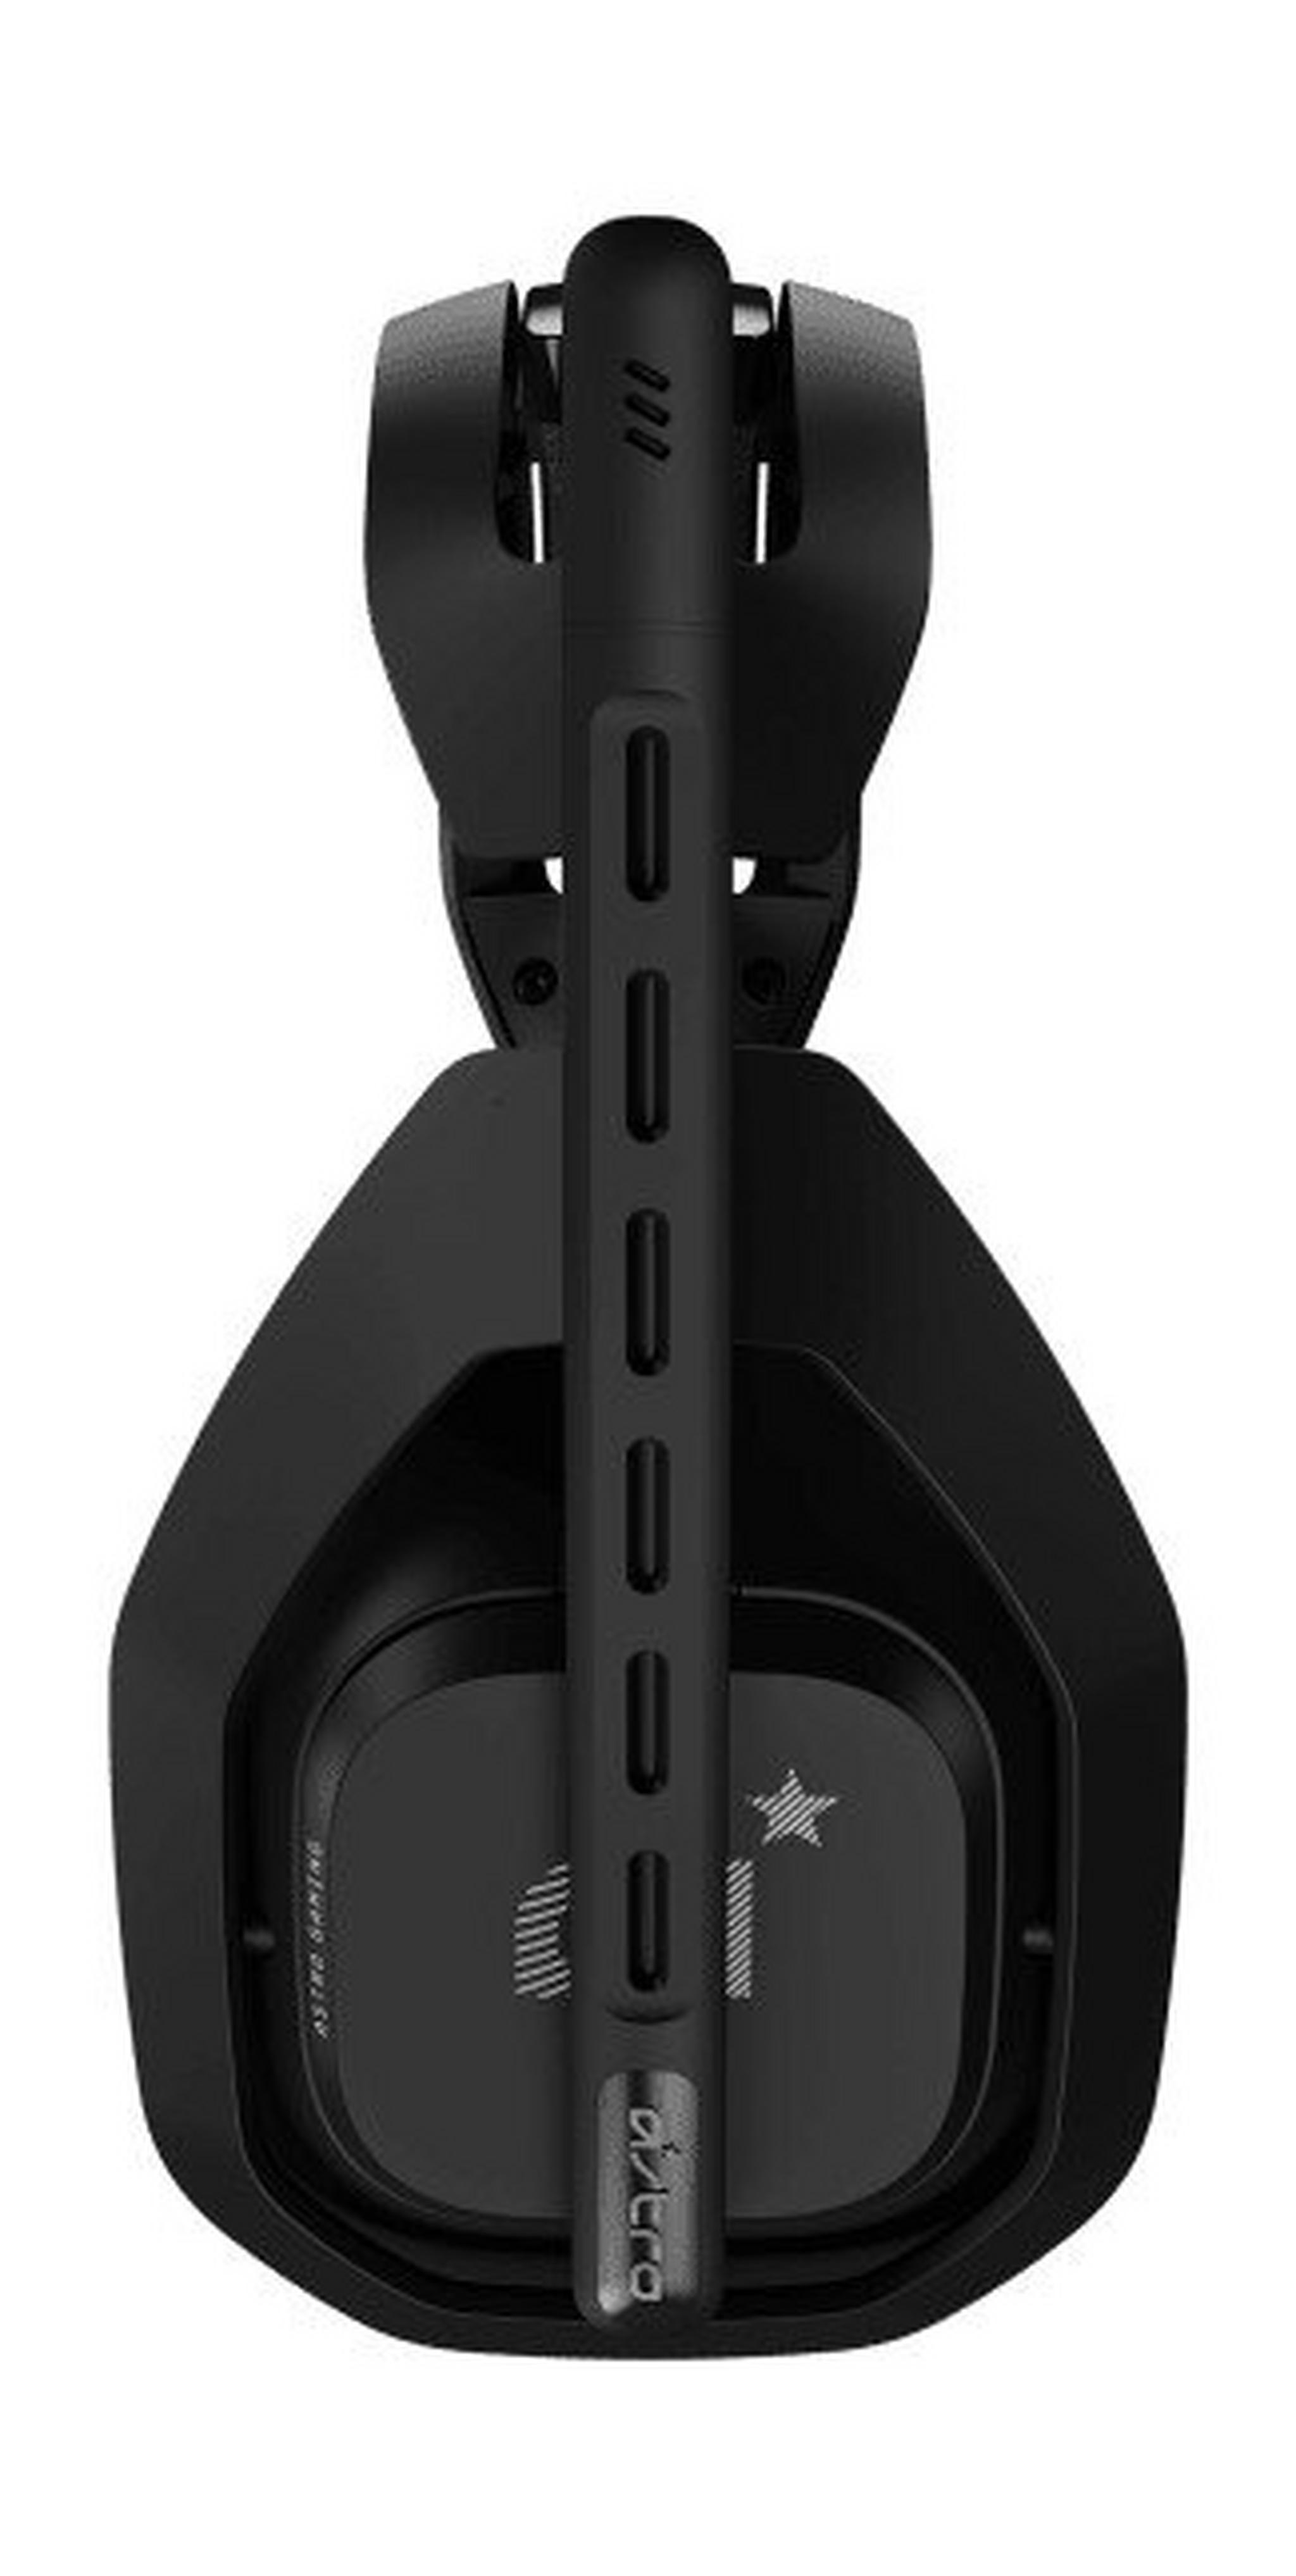 Astro A50 Playstation 4 Wireless Gaming Headset - Black